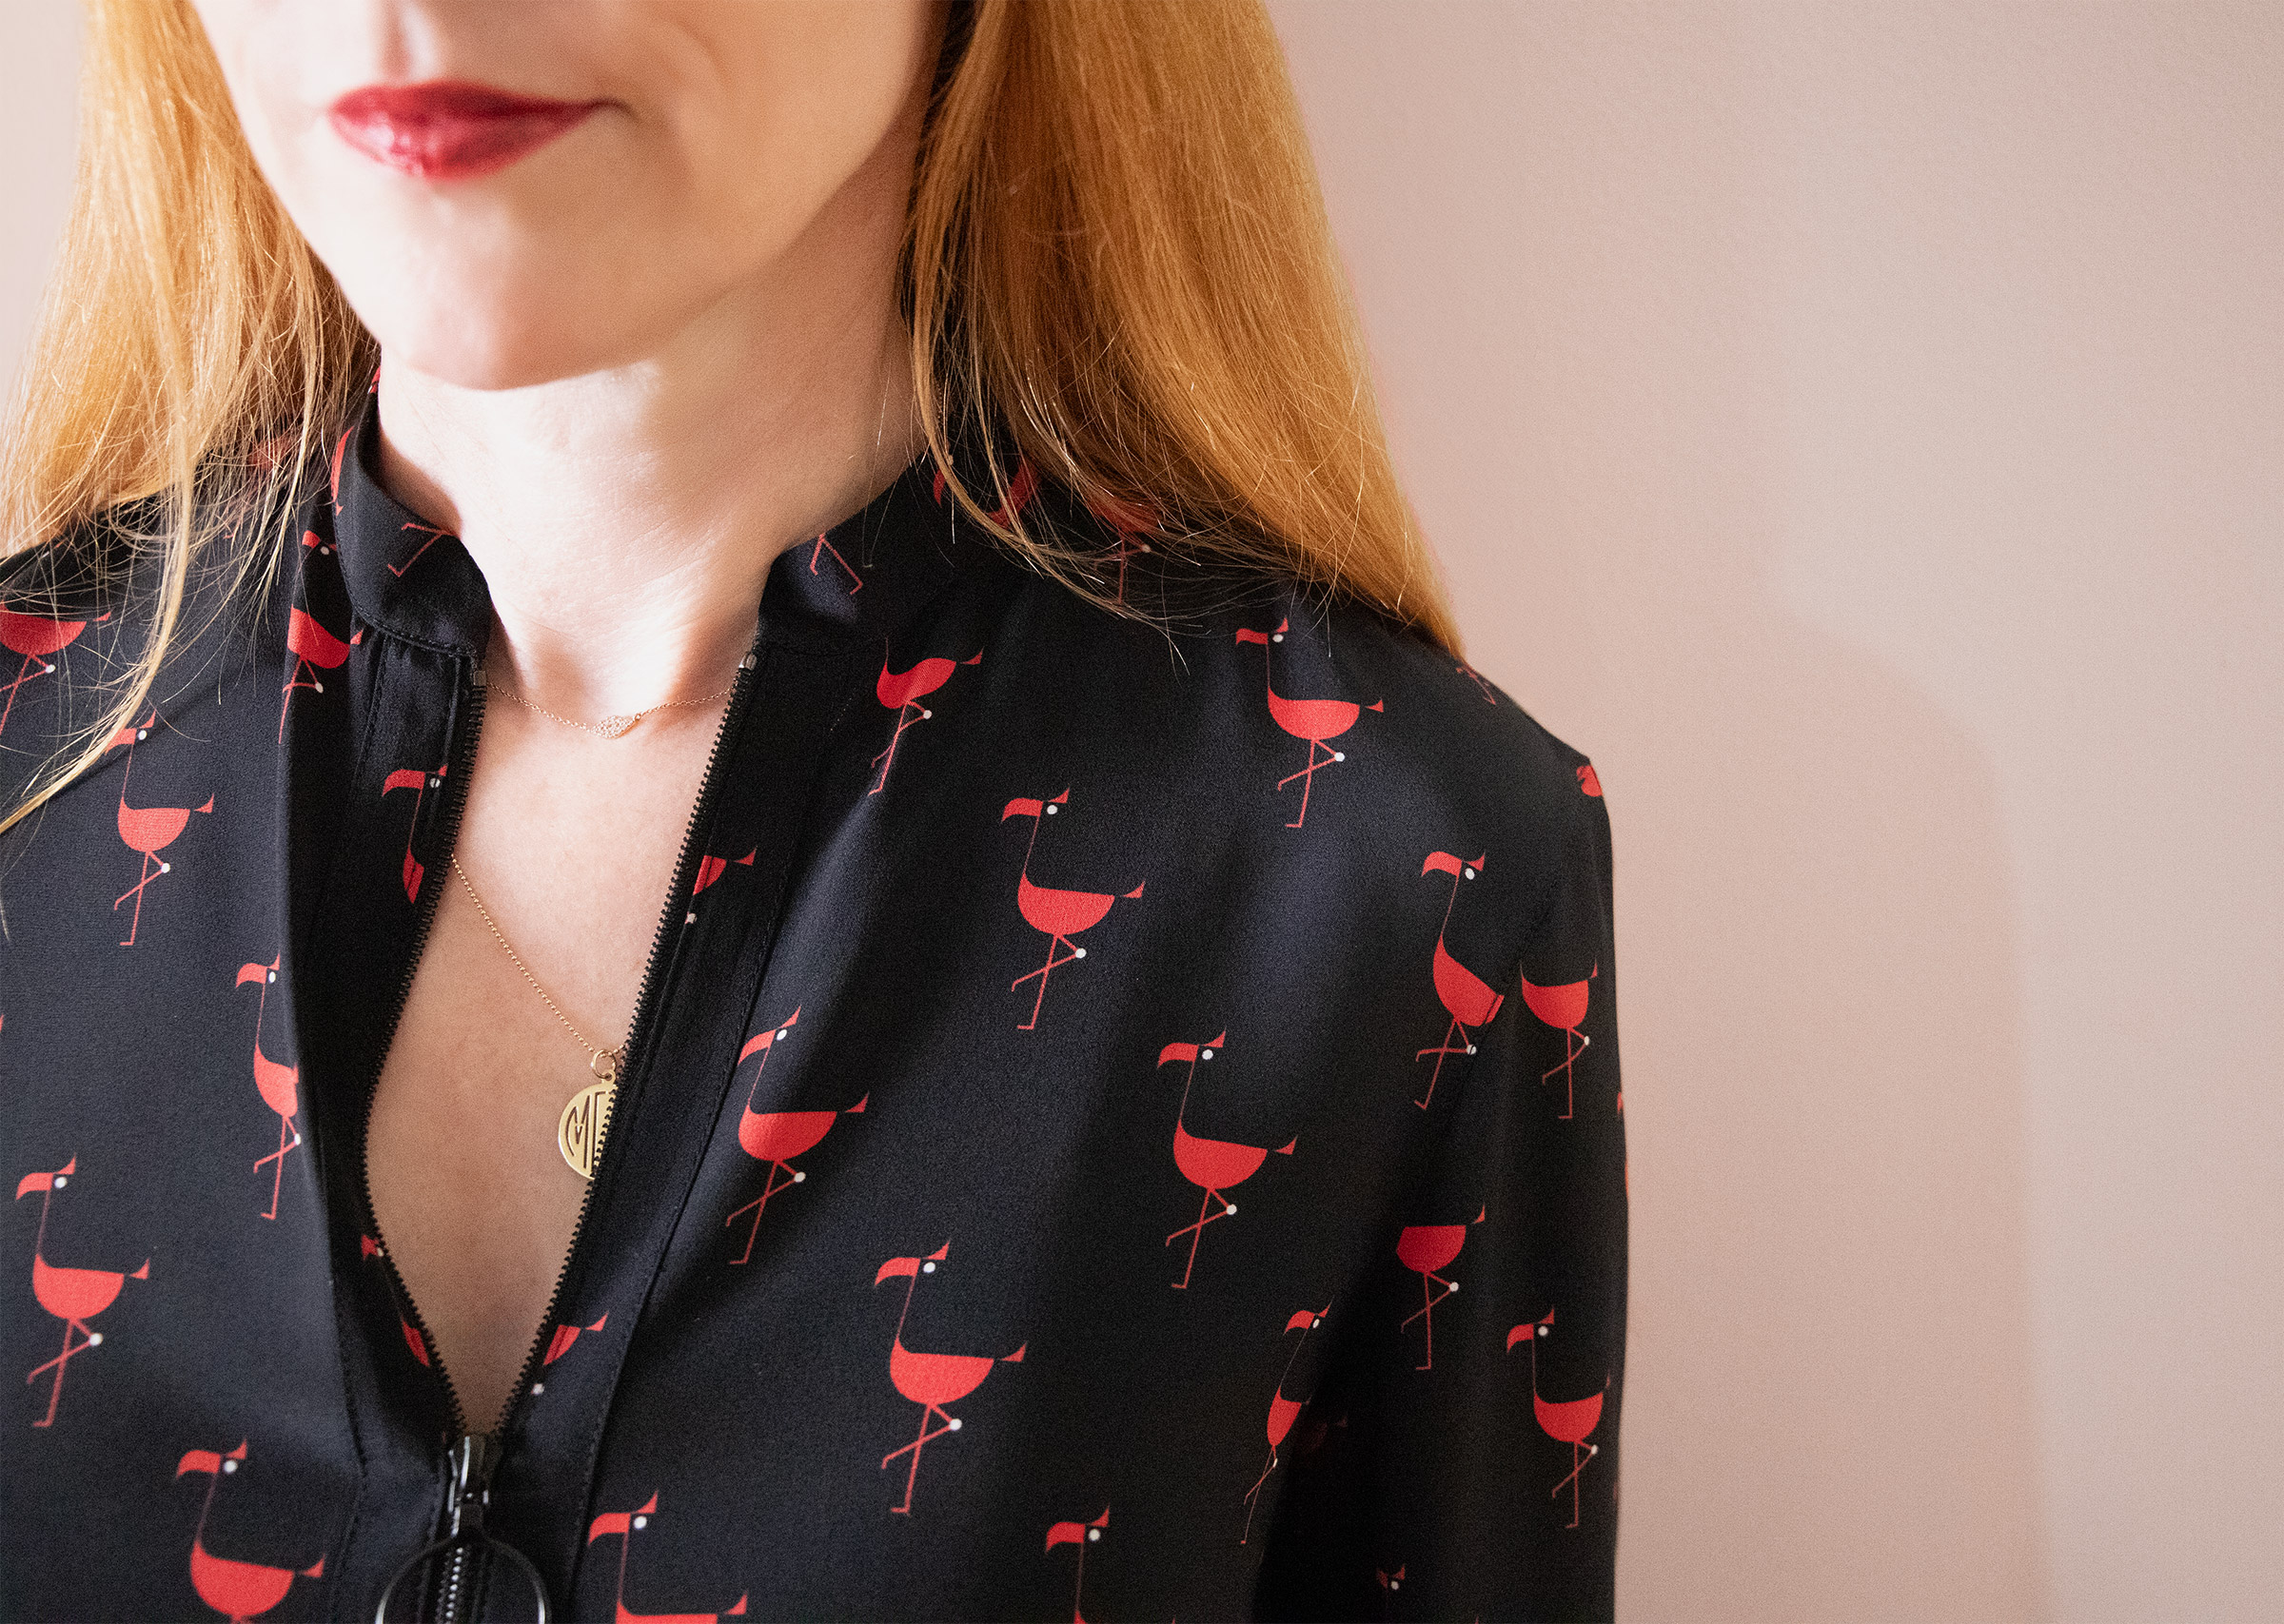 red haired woman close up wearing a black tunic with red flamingos